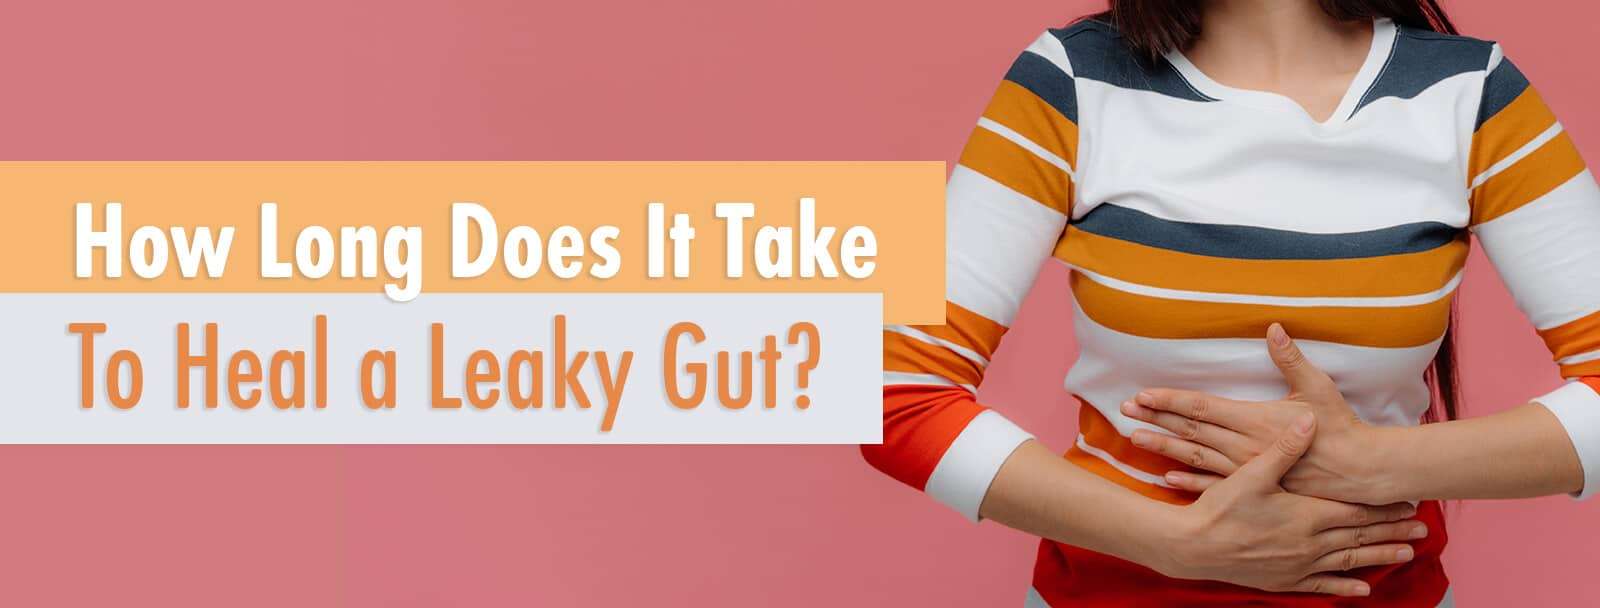 How long does it take to heal a leaky gut?